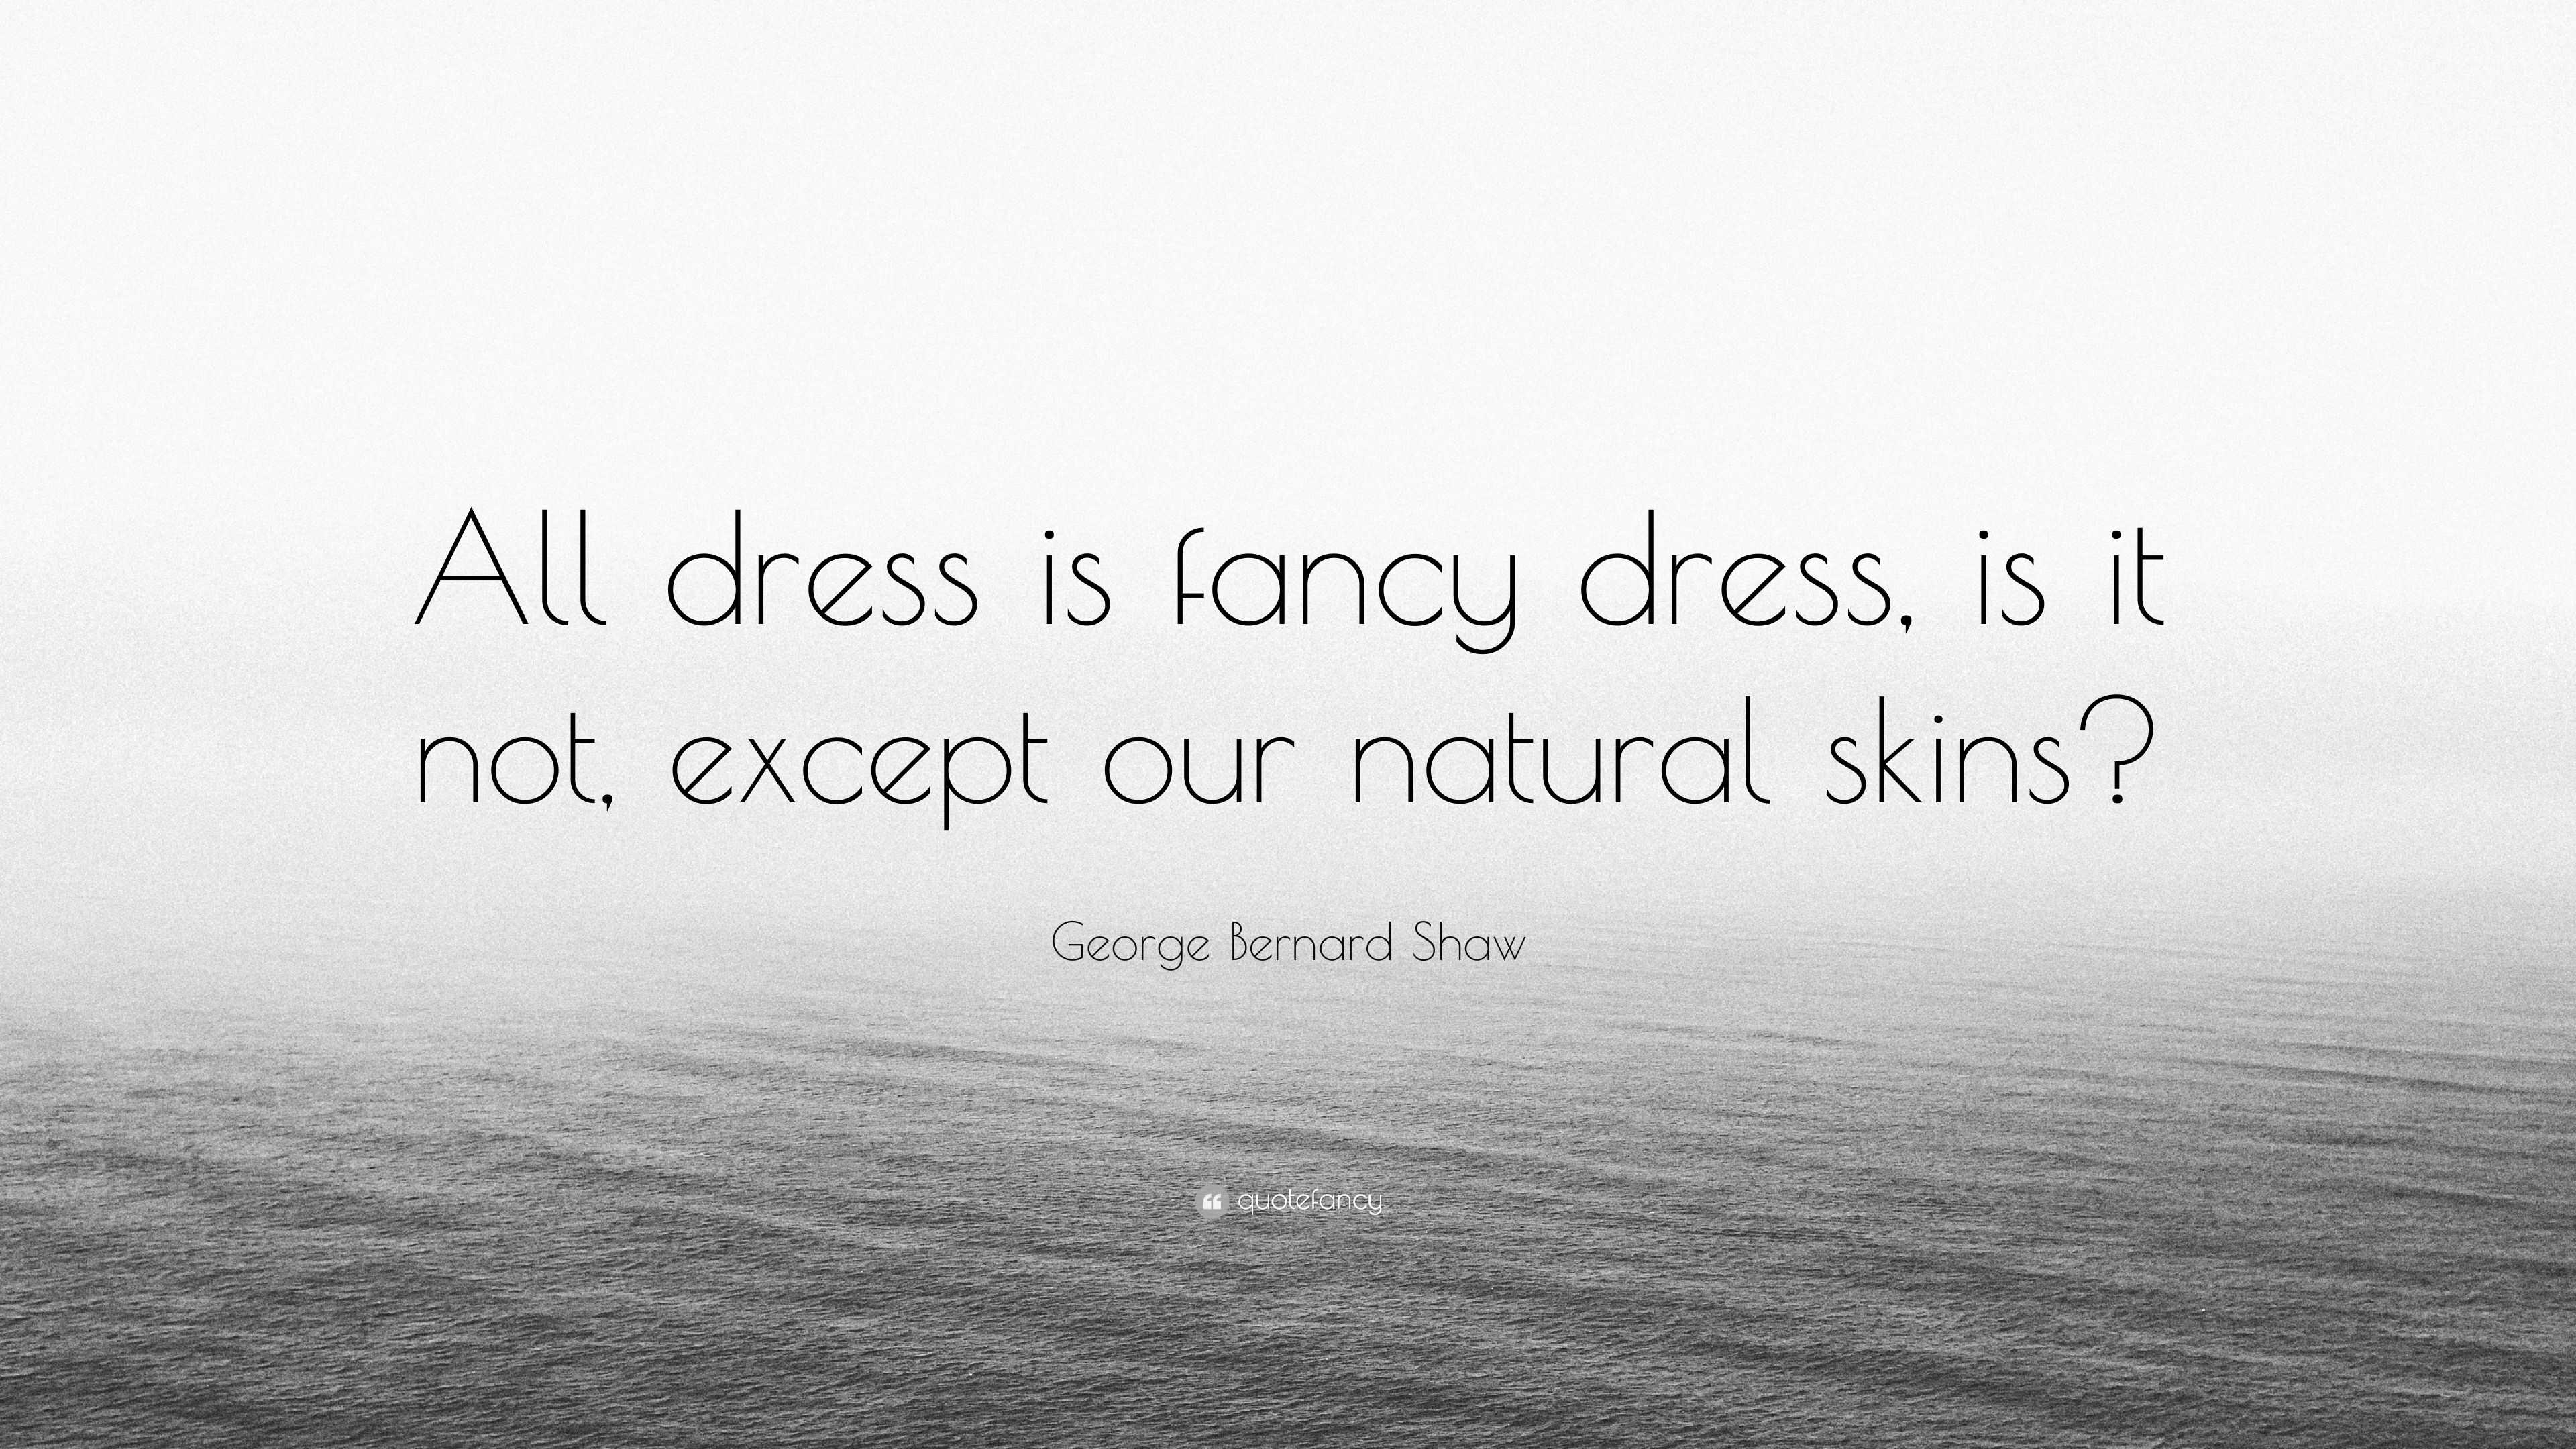 George Bernard Shaw Quote: “All dress is fancy dress, is it not, except ...